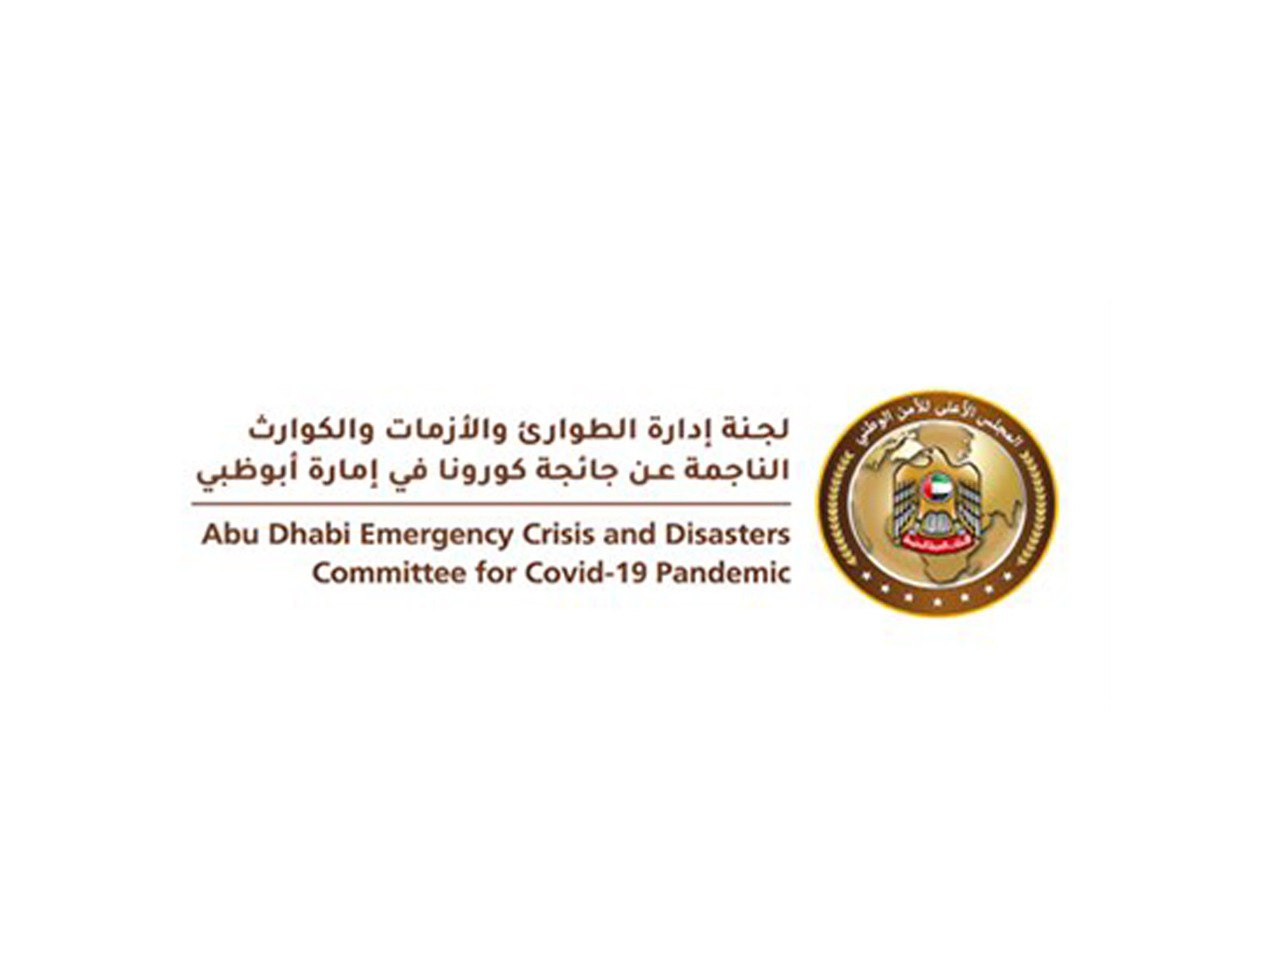 Abu Dhabi Emergency, Crisis And Disasters Committee Cancels COVID-19 Testing Entry Requirements, Updates Procedures To Enter The Emirate From Within The UAE